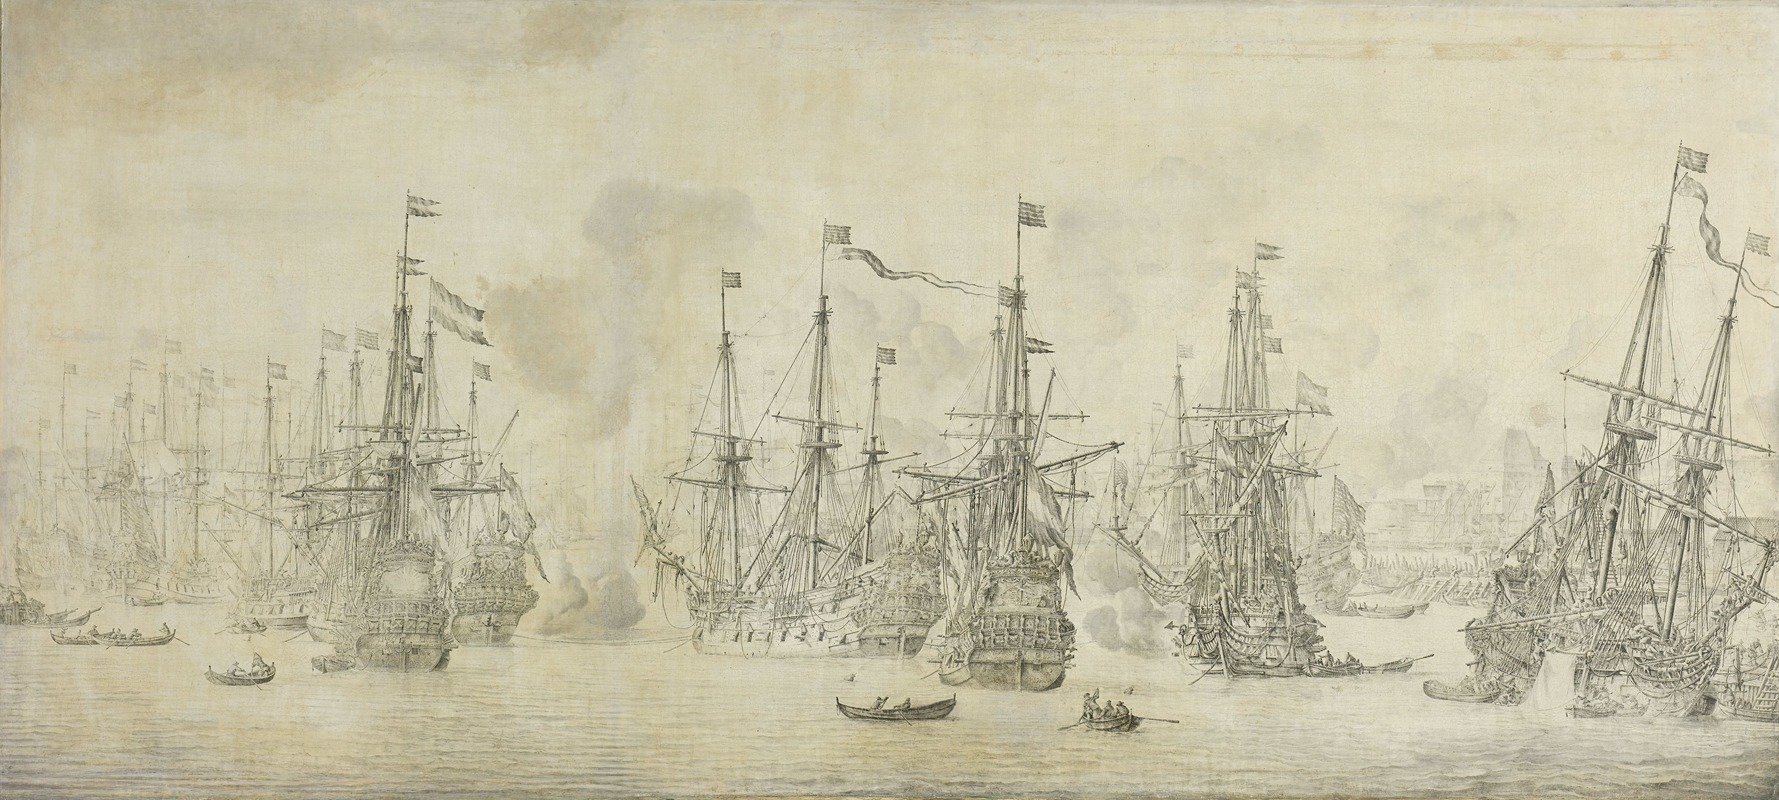 Willem van de Velde the Elder - The Failed Attack of the English on the Return Fleet in the Port of Bergen, Norway, 12 August 1665; an episode from the Second Anglo-Dutch War